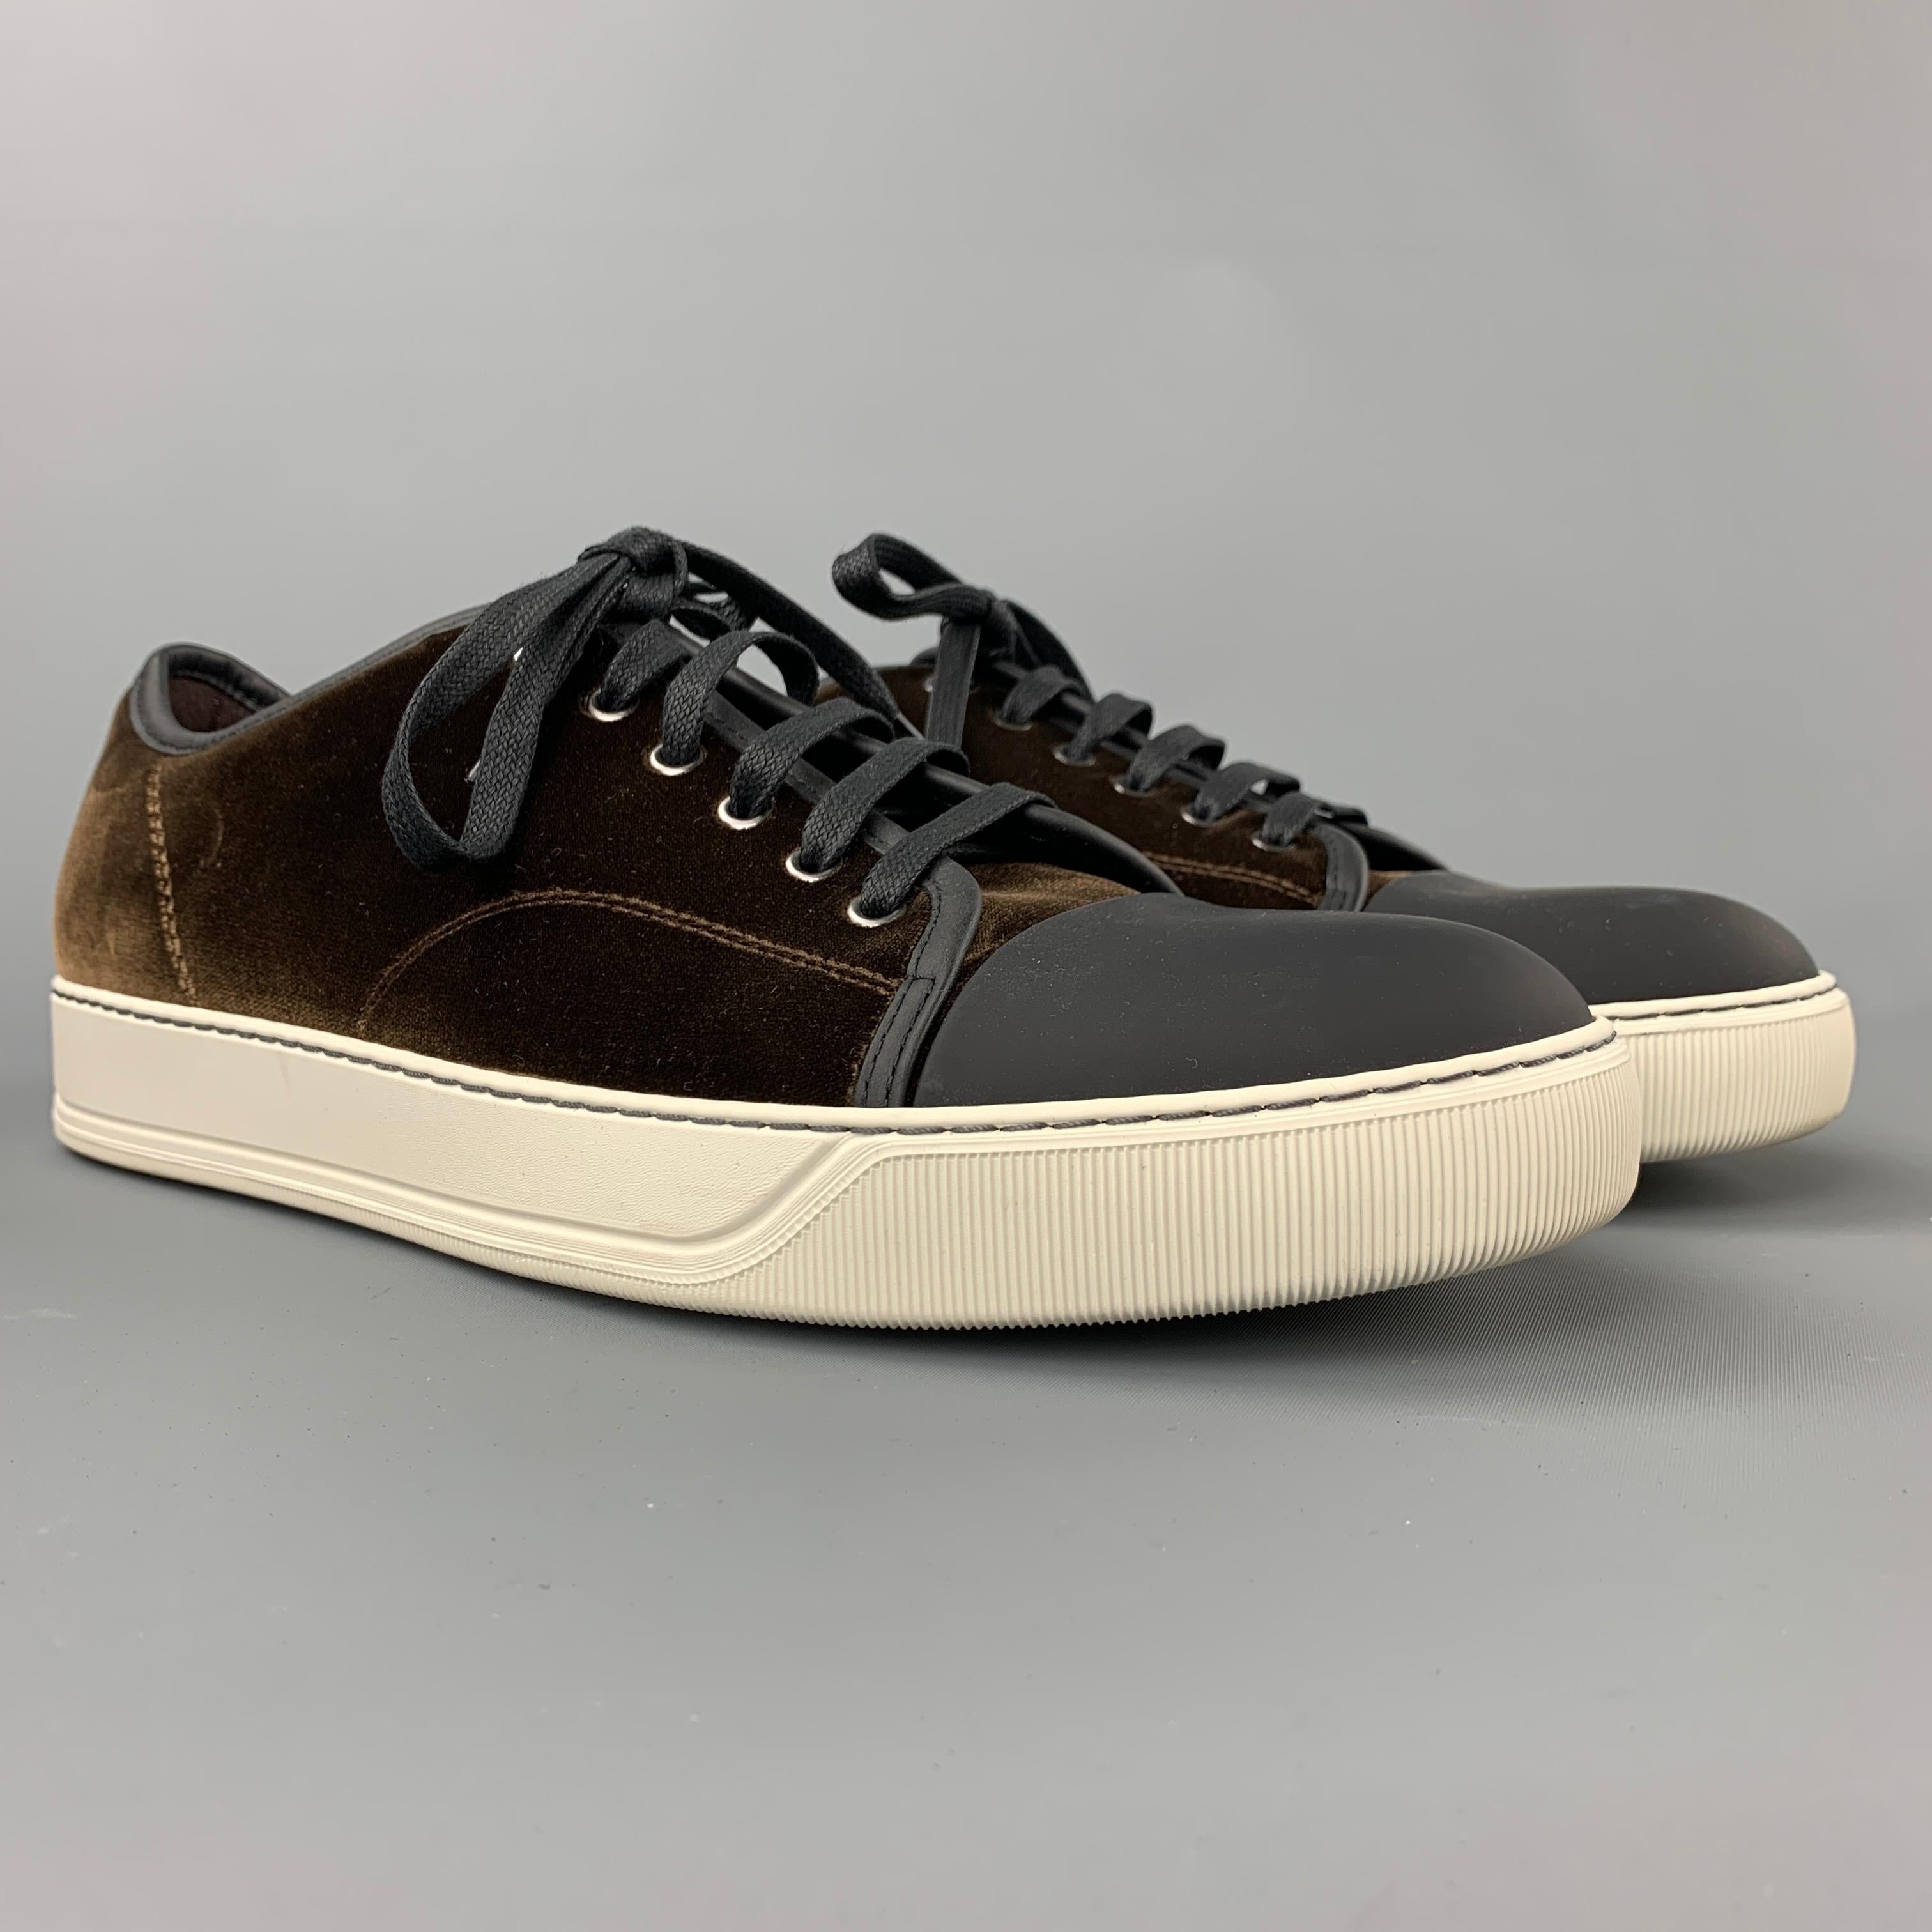 LANVIN sneakers comes in a brown velvet with a black cap toe design featuring a rubber sole and a lace up closure. Made in Portugal.

Excellent Pre-Owned Condition.
Marked: 10
Original Retail Price: $490.00

Outsole: 12 in. x 4 in. 